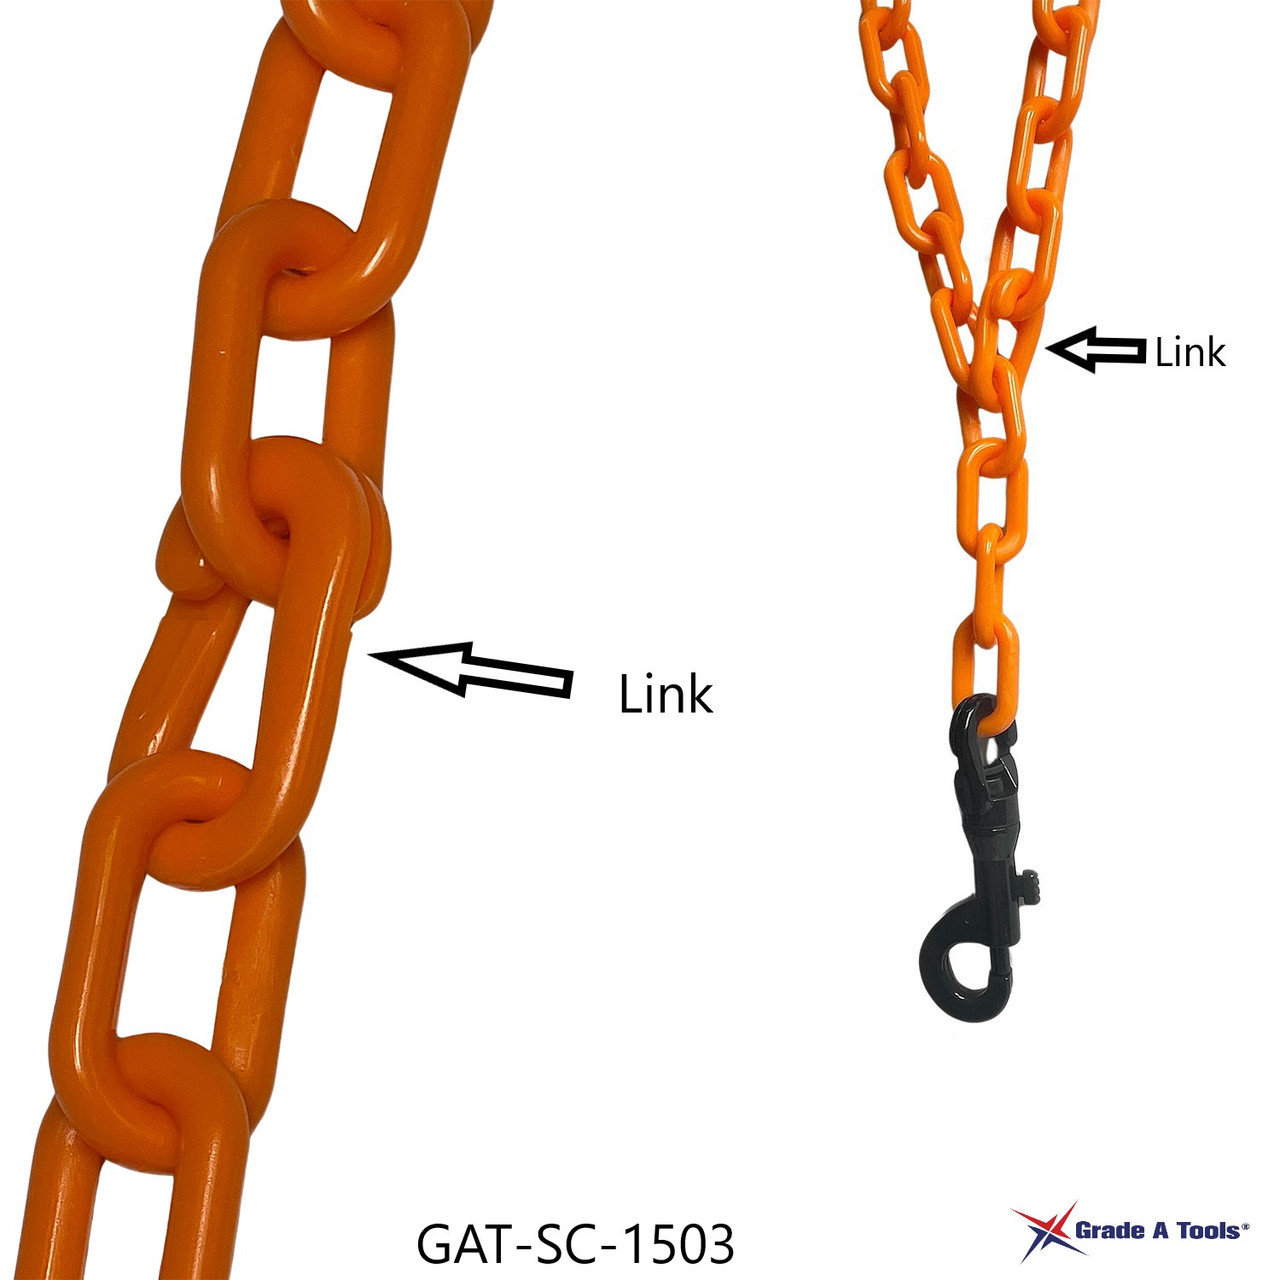 Plastic Safety Chain Orange Repair  joining  Link connector  1-5/8" X 1/4" (41mm X 6mm) A